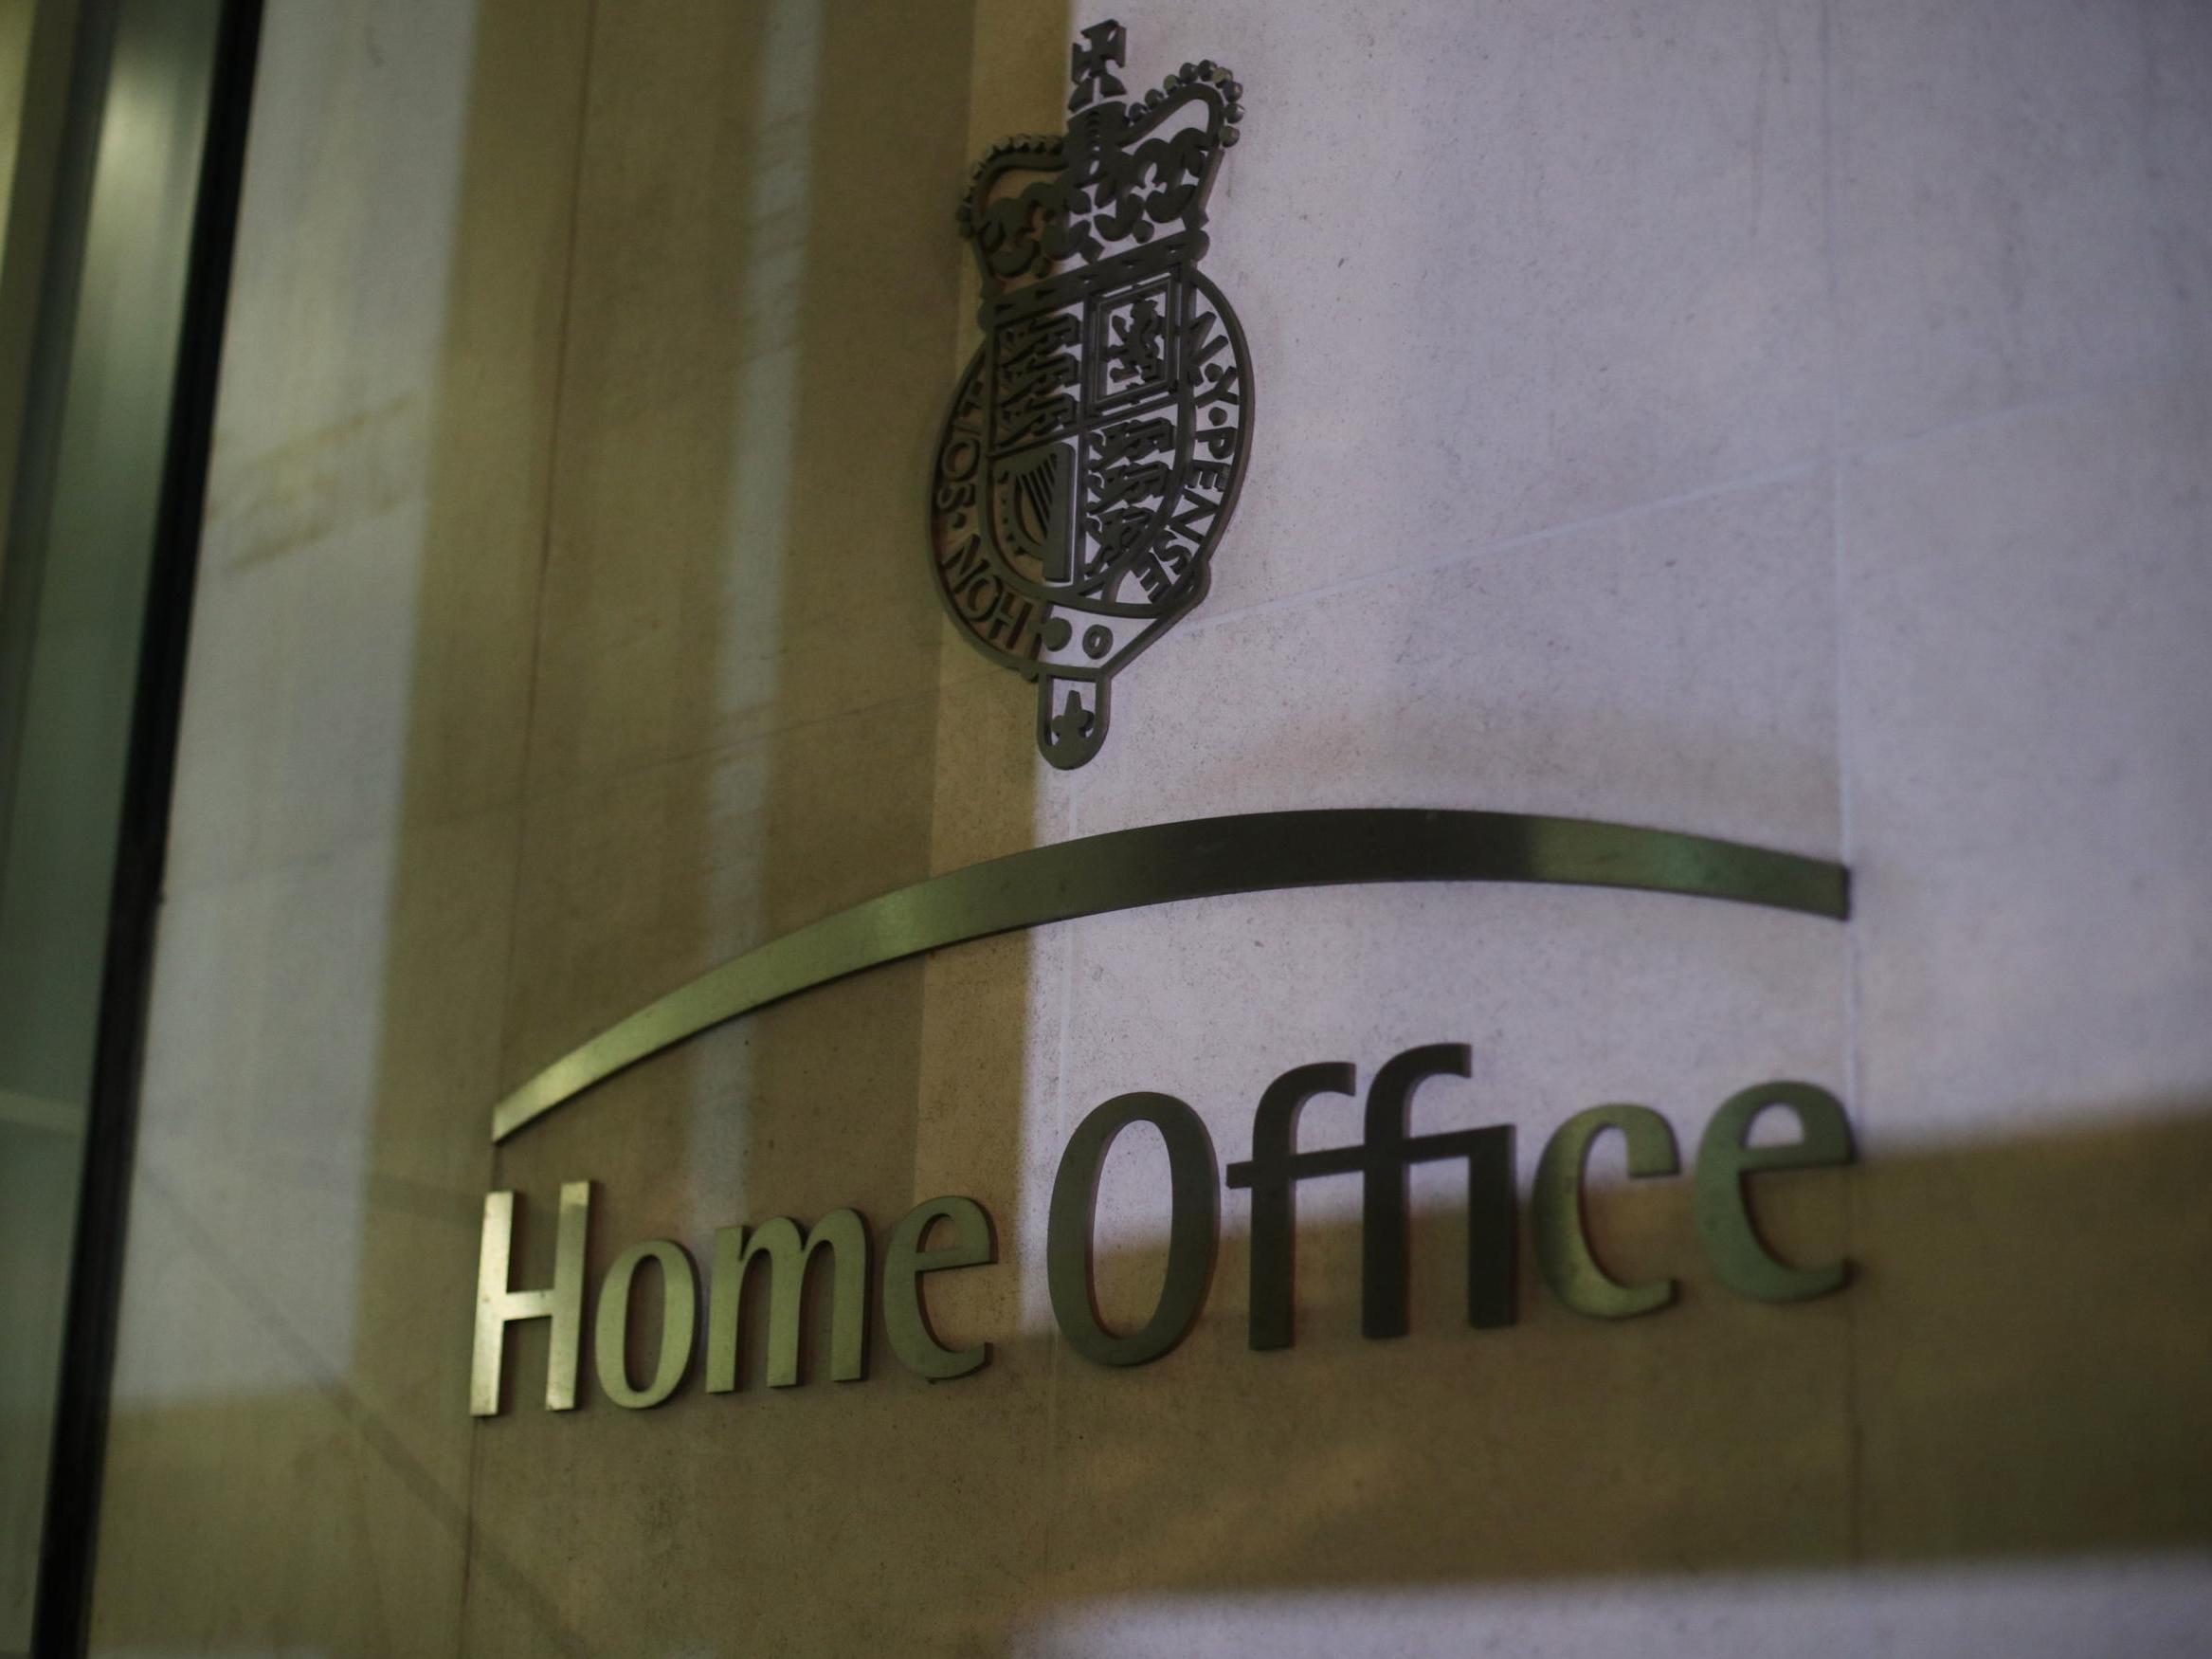 The Home Office has announced that it has temporarily introduced additional locations to register asylum claims, but campaigners say this doesn't go far enough as people are still required to travel sometimes long distances to register claims